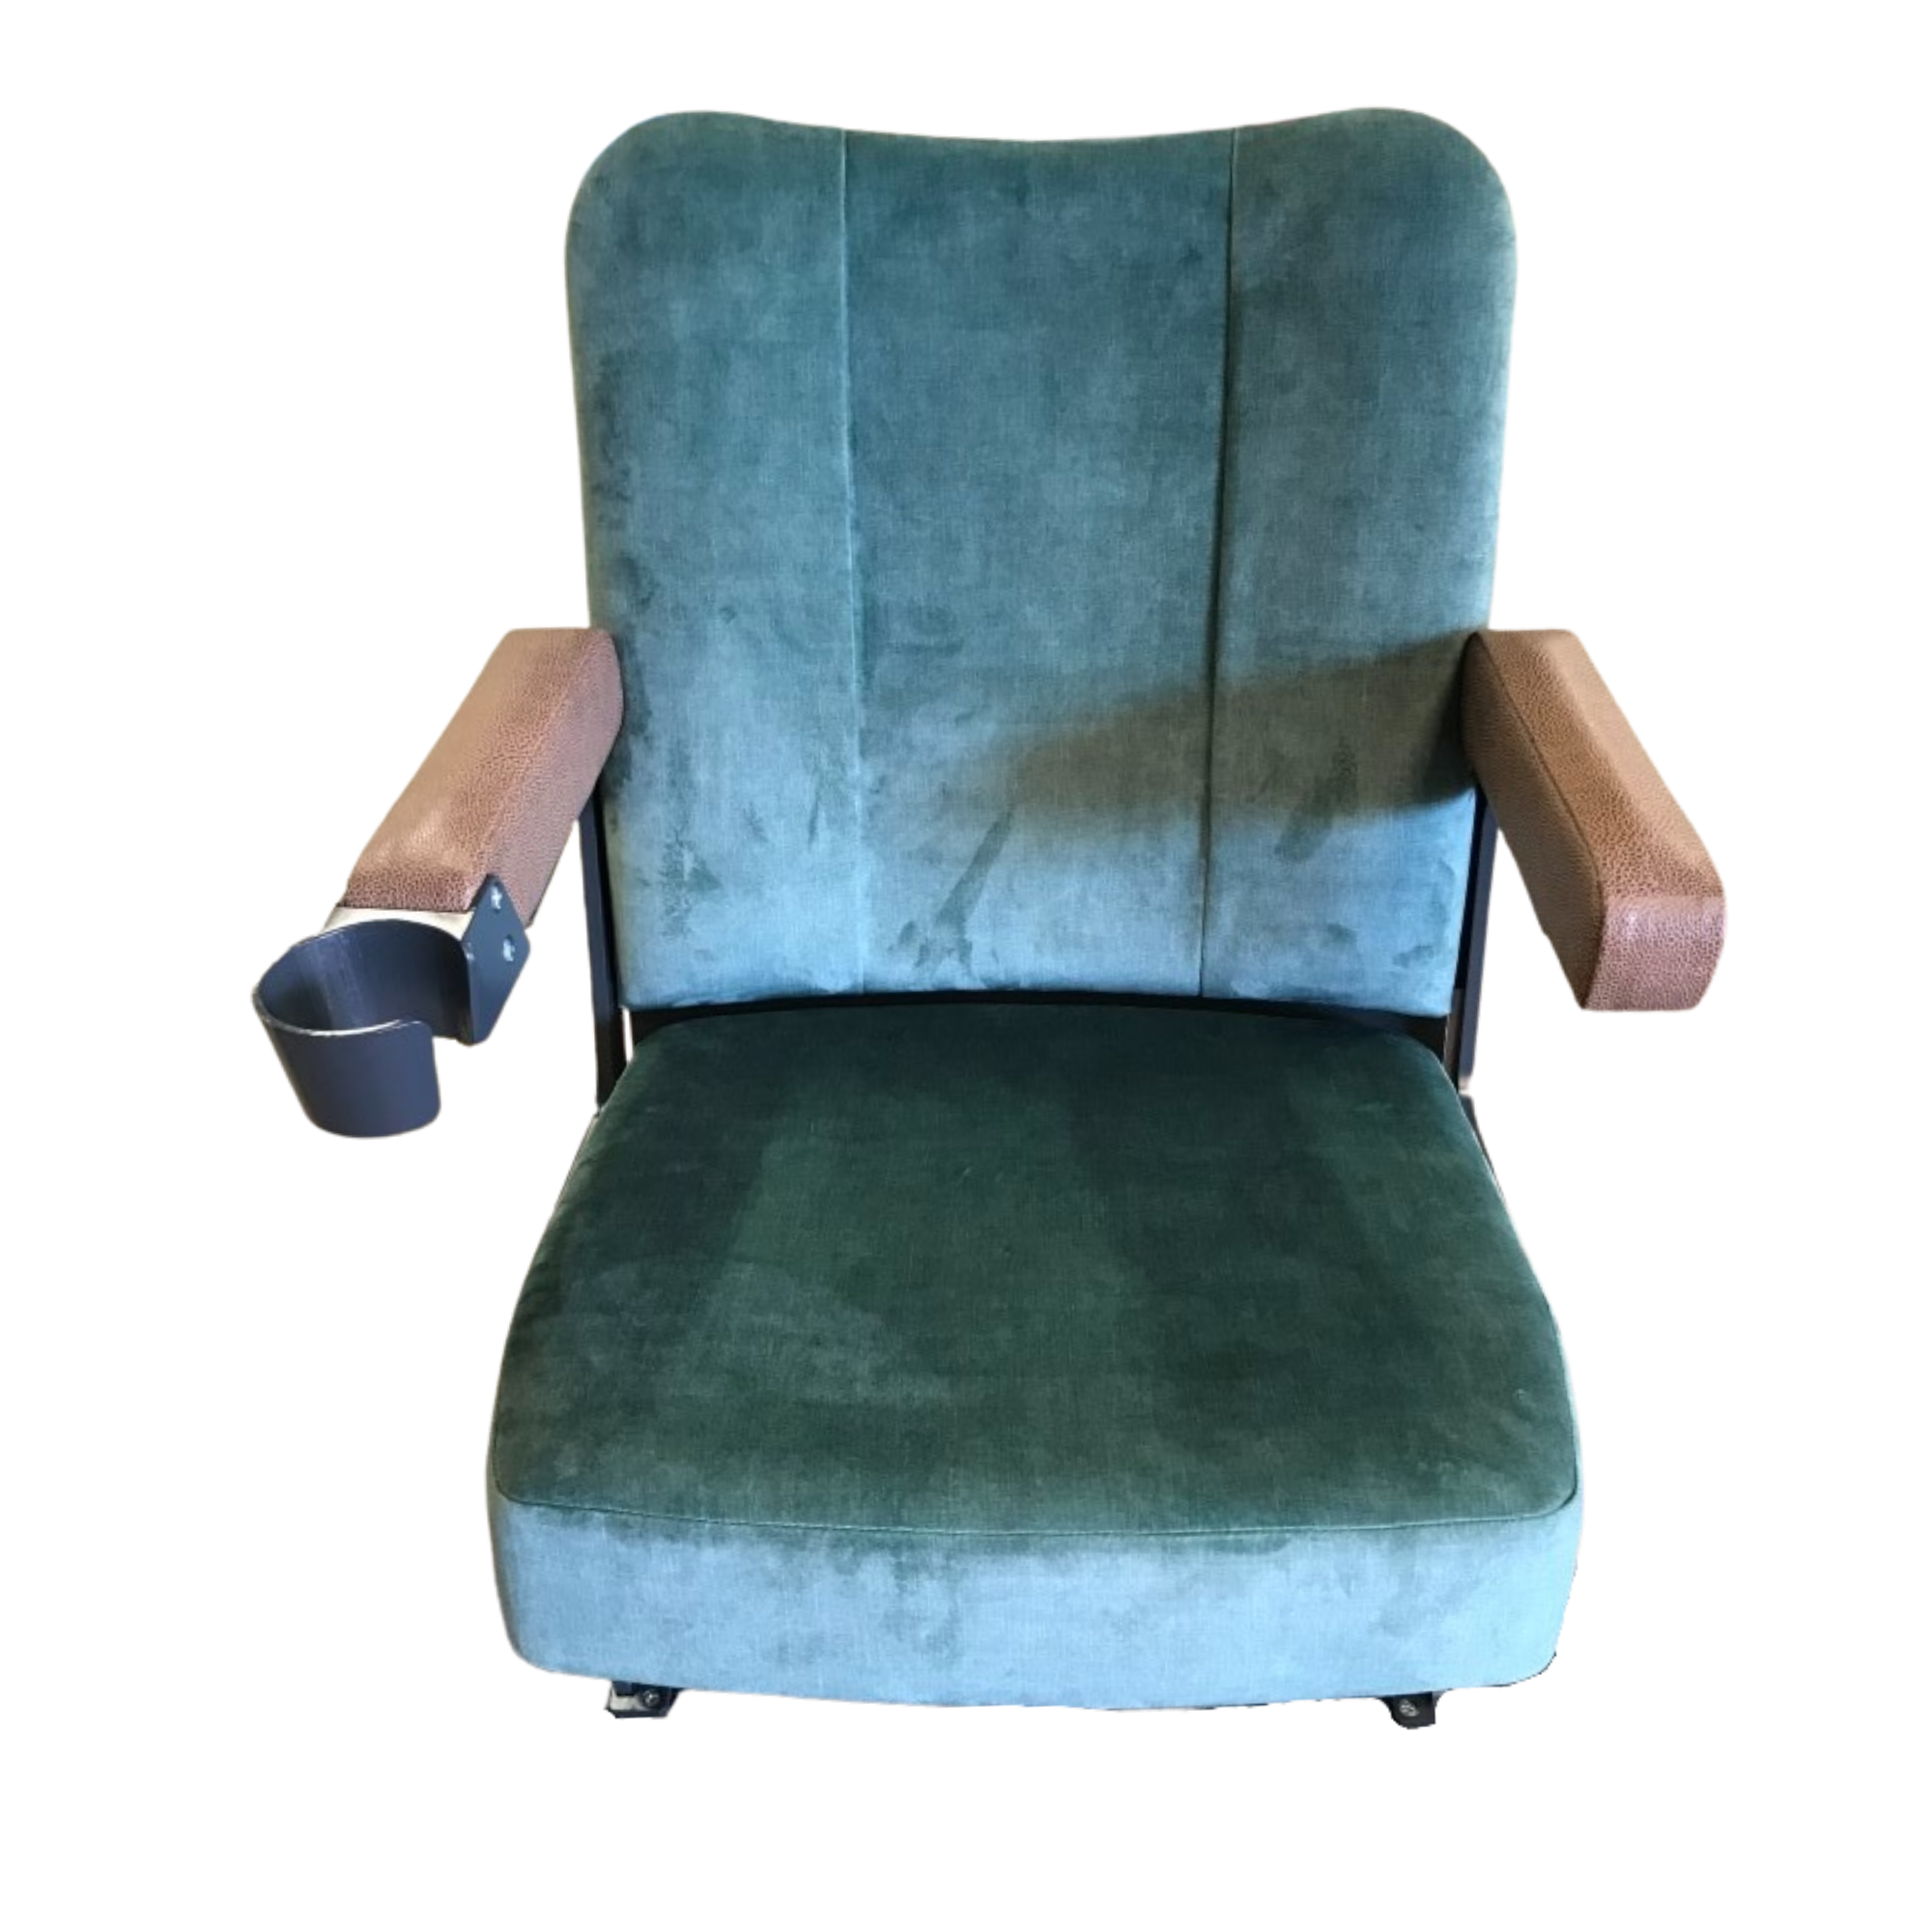 A blue velvet theater chair with a wooden armrest.